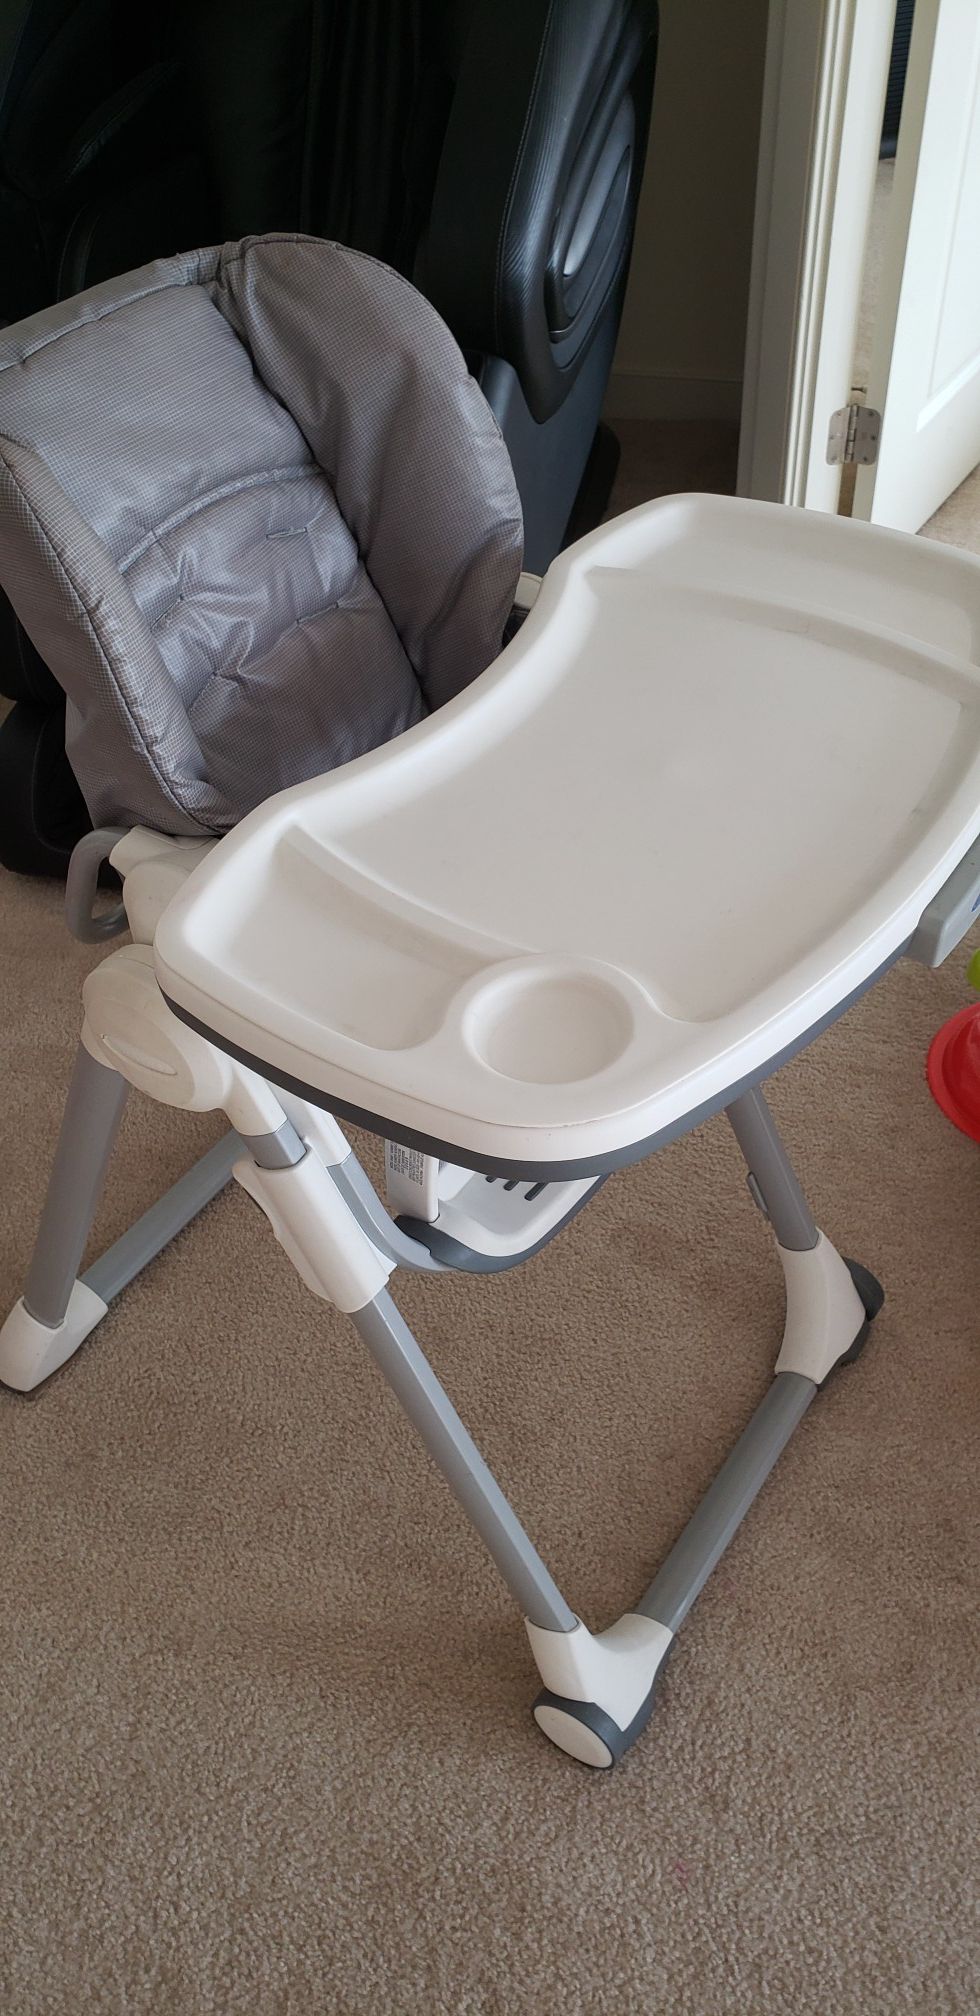 Graco high chair (used but in good condition)